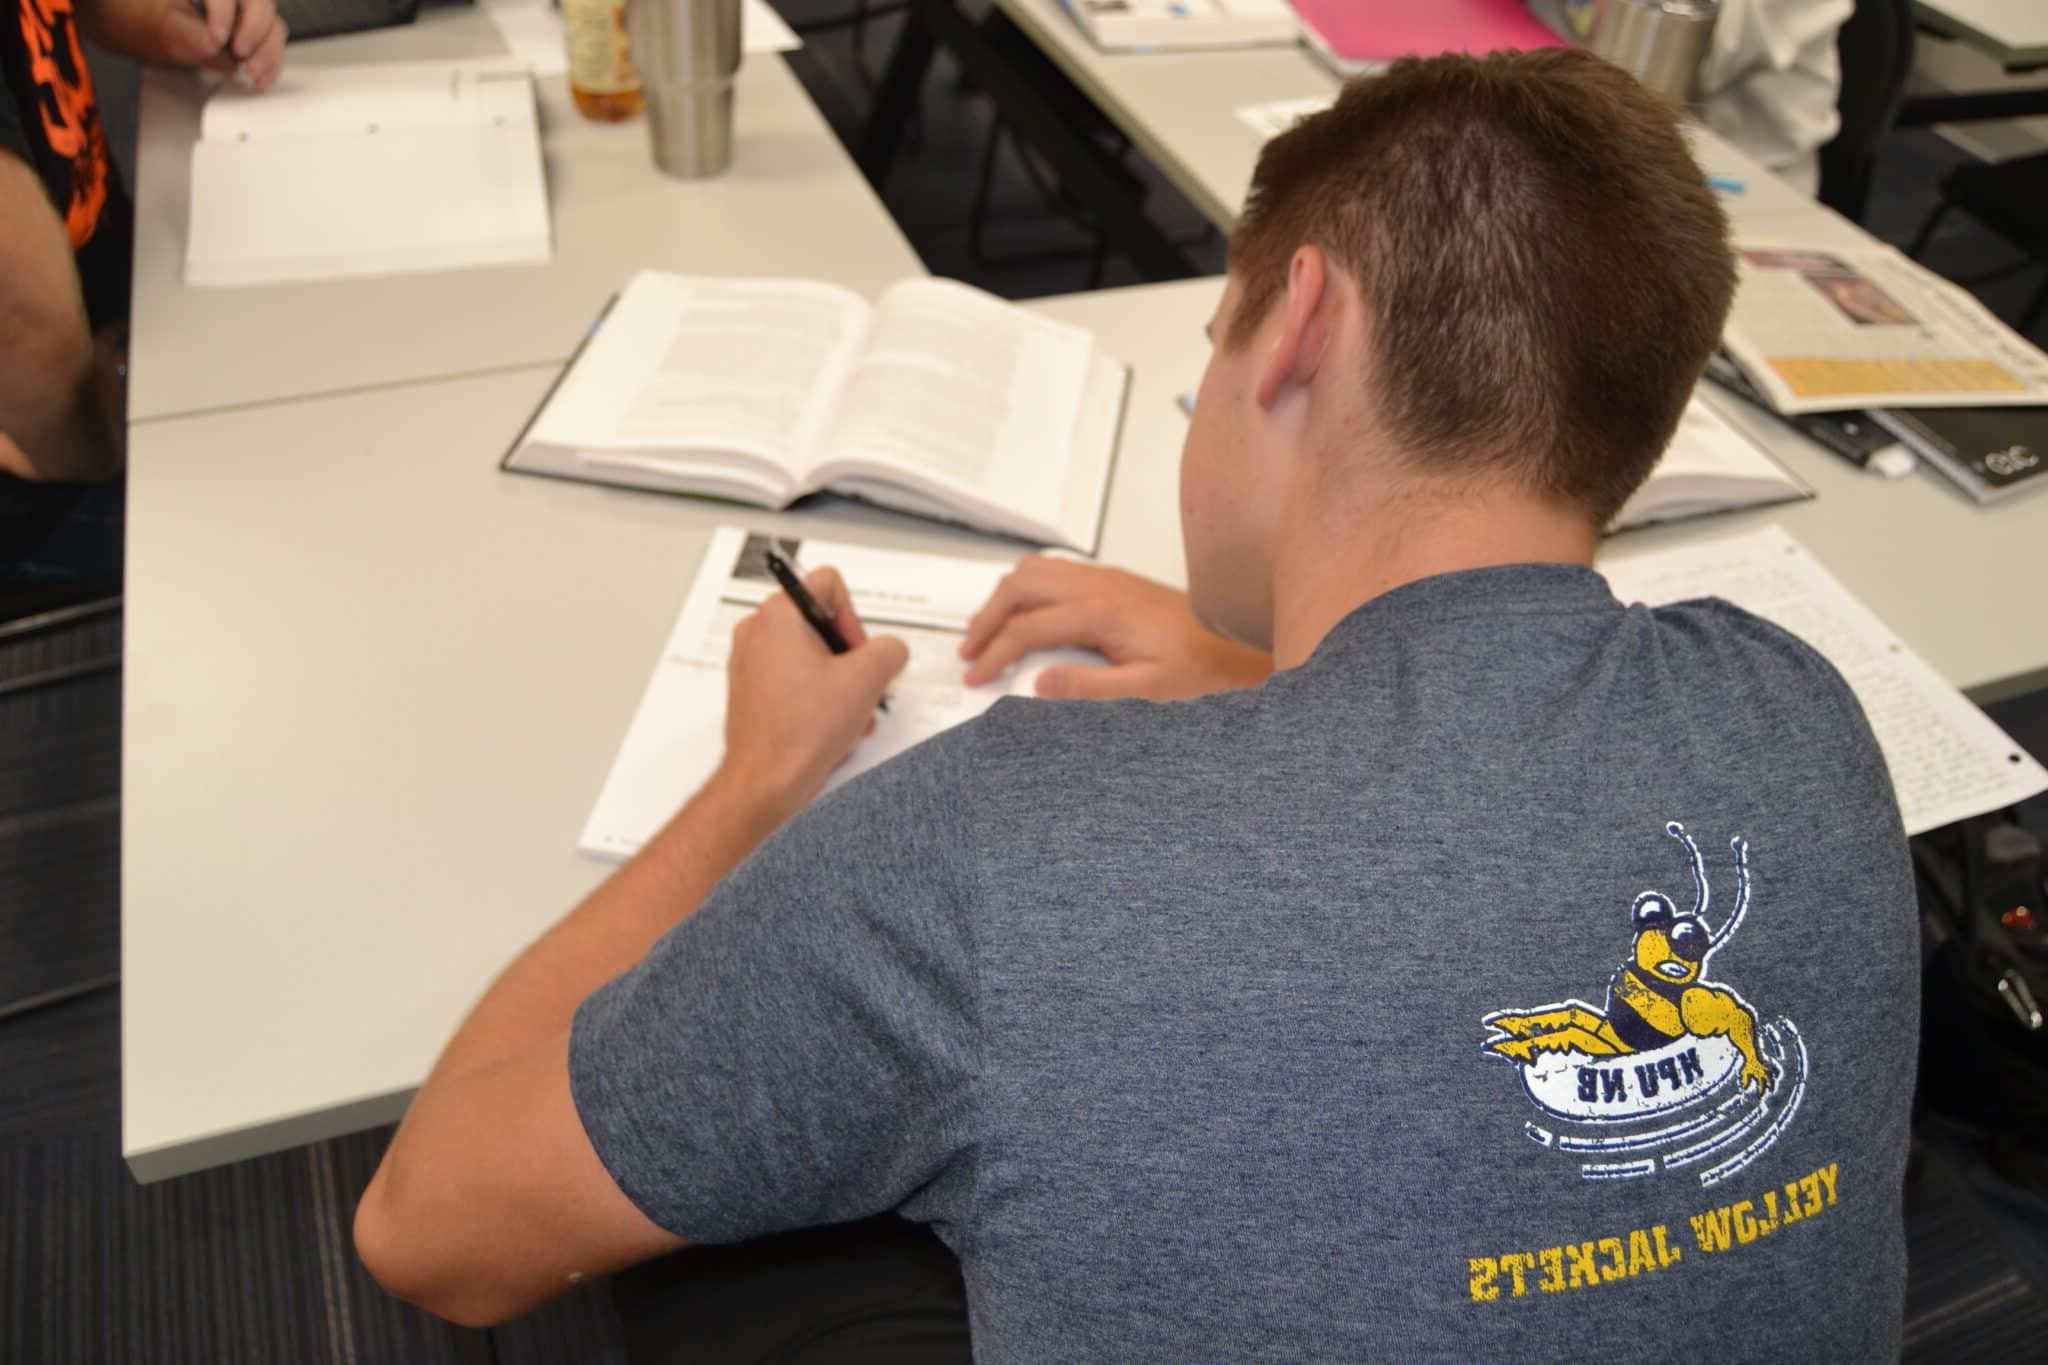 A student wearing a grey shirt with a "Howard Payne University Yellow Jackets" emblem is writing notes in a classroom setting. | HPU